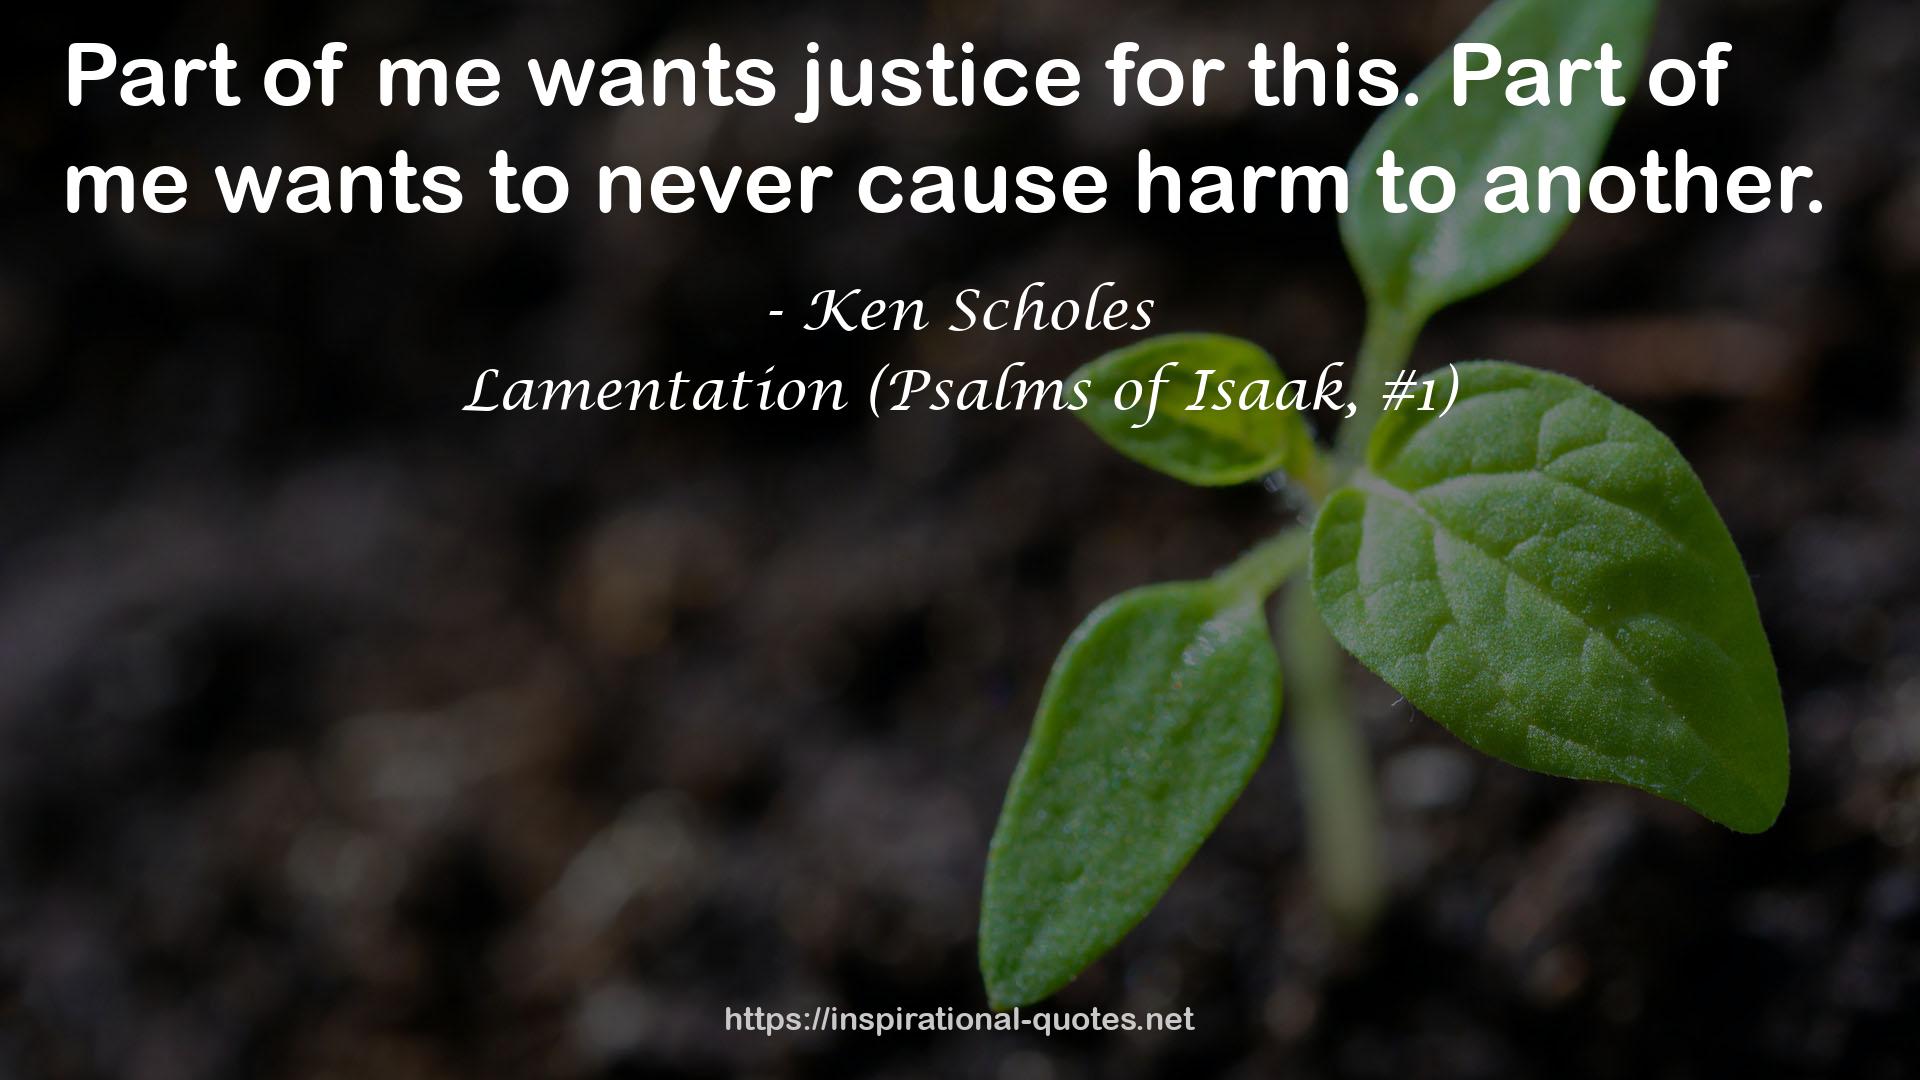 Lamentation (Psalms of Isaak, #1) QUOTES